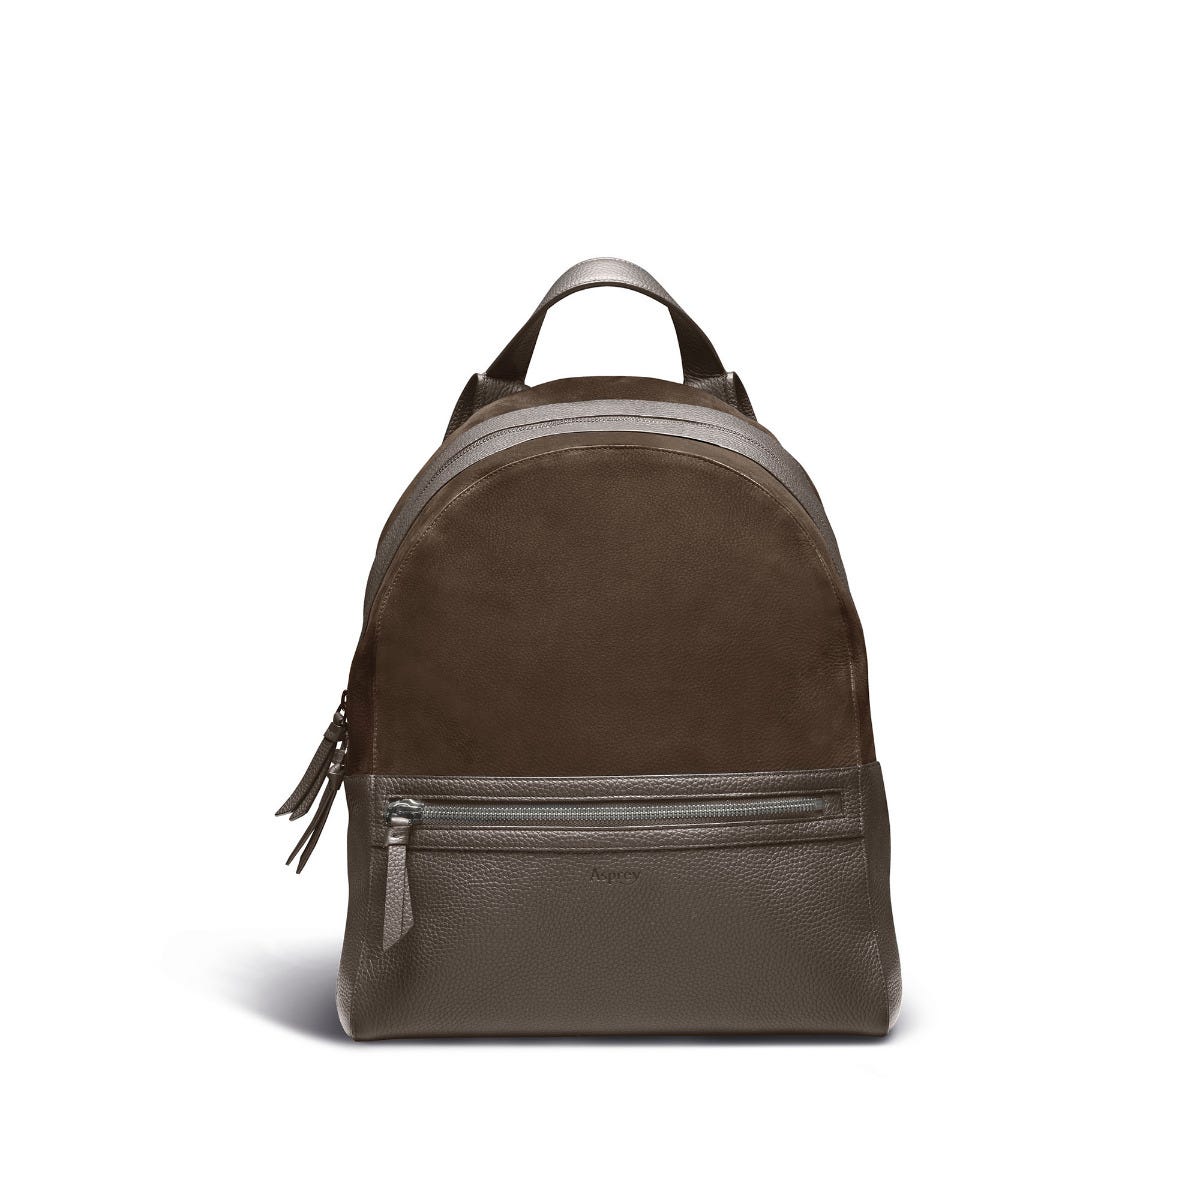 GMT Backpack in Soft Grain Leather & Nubuck